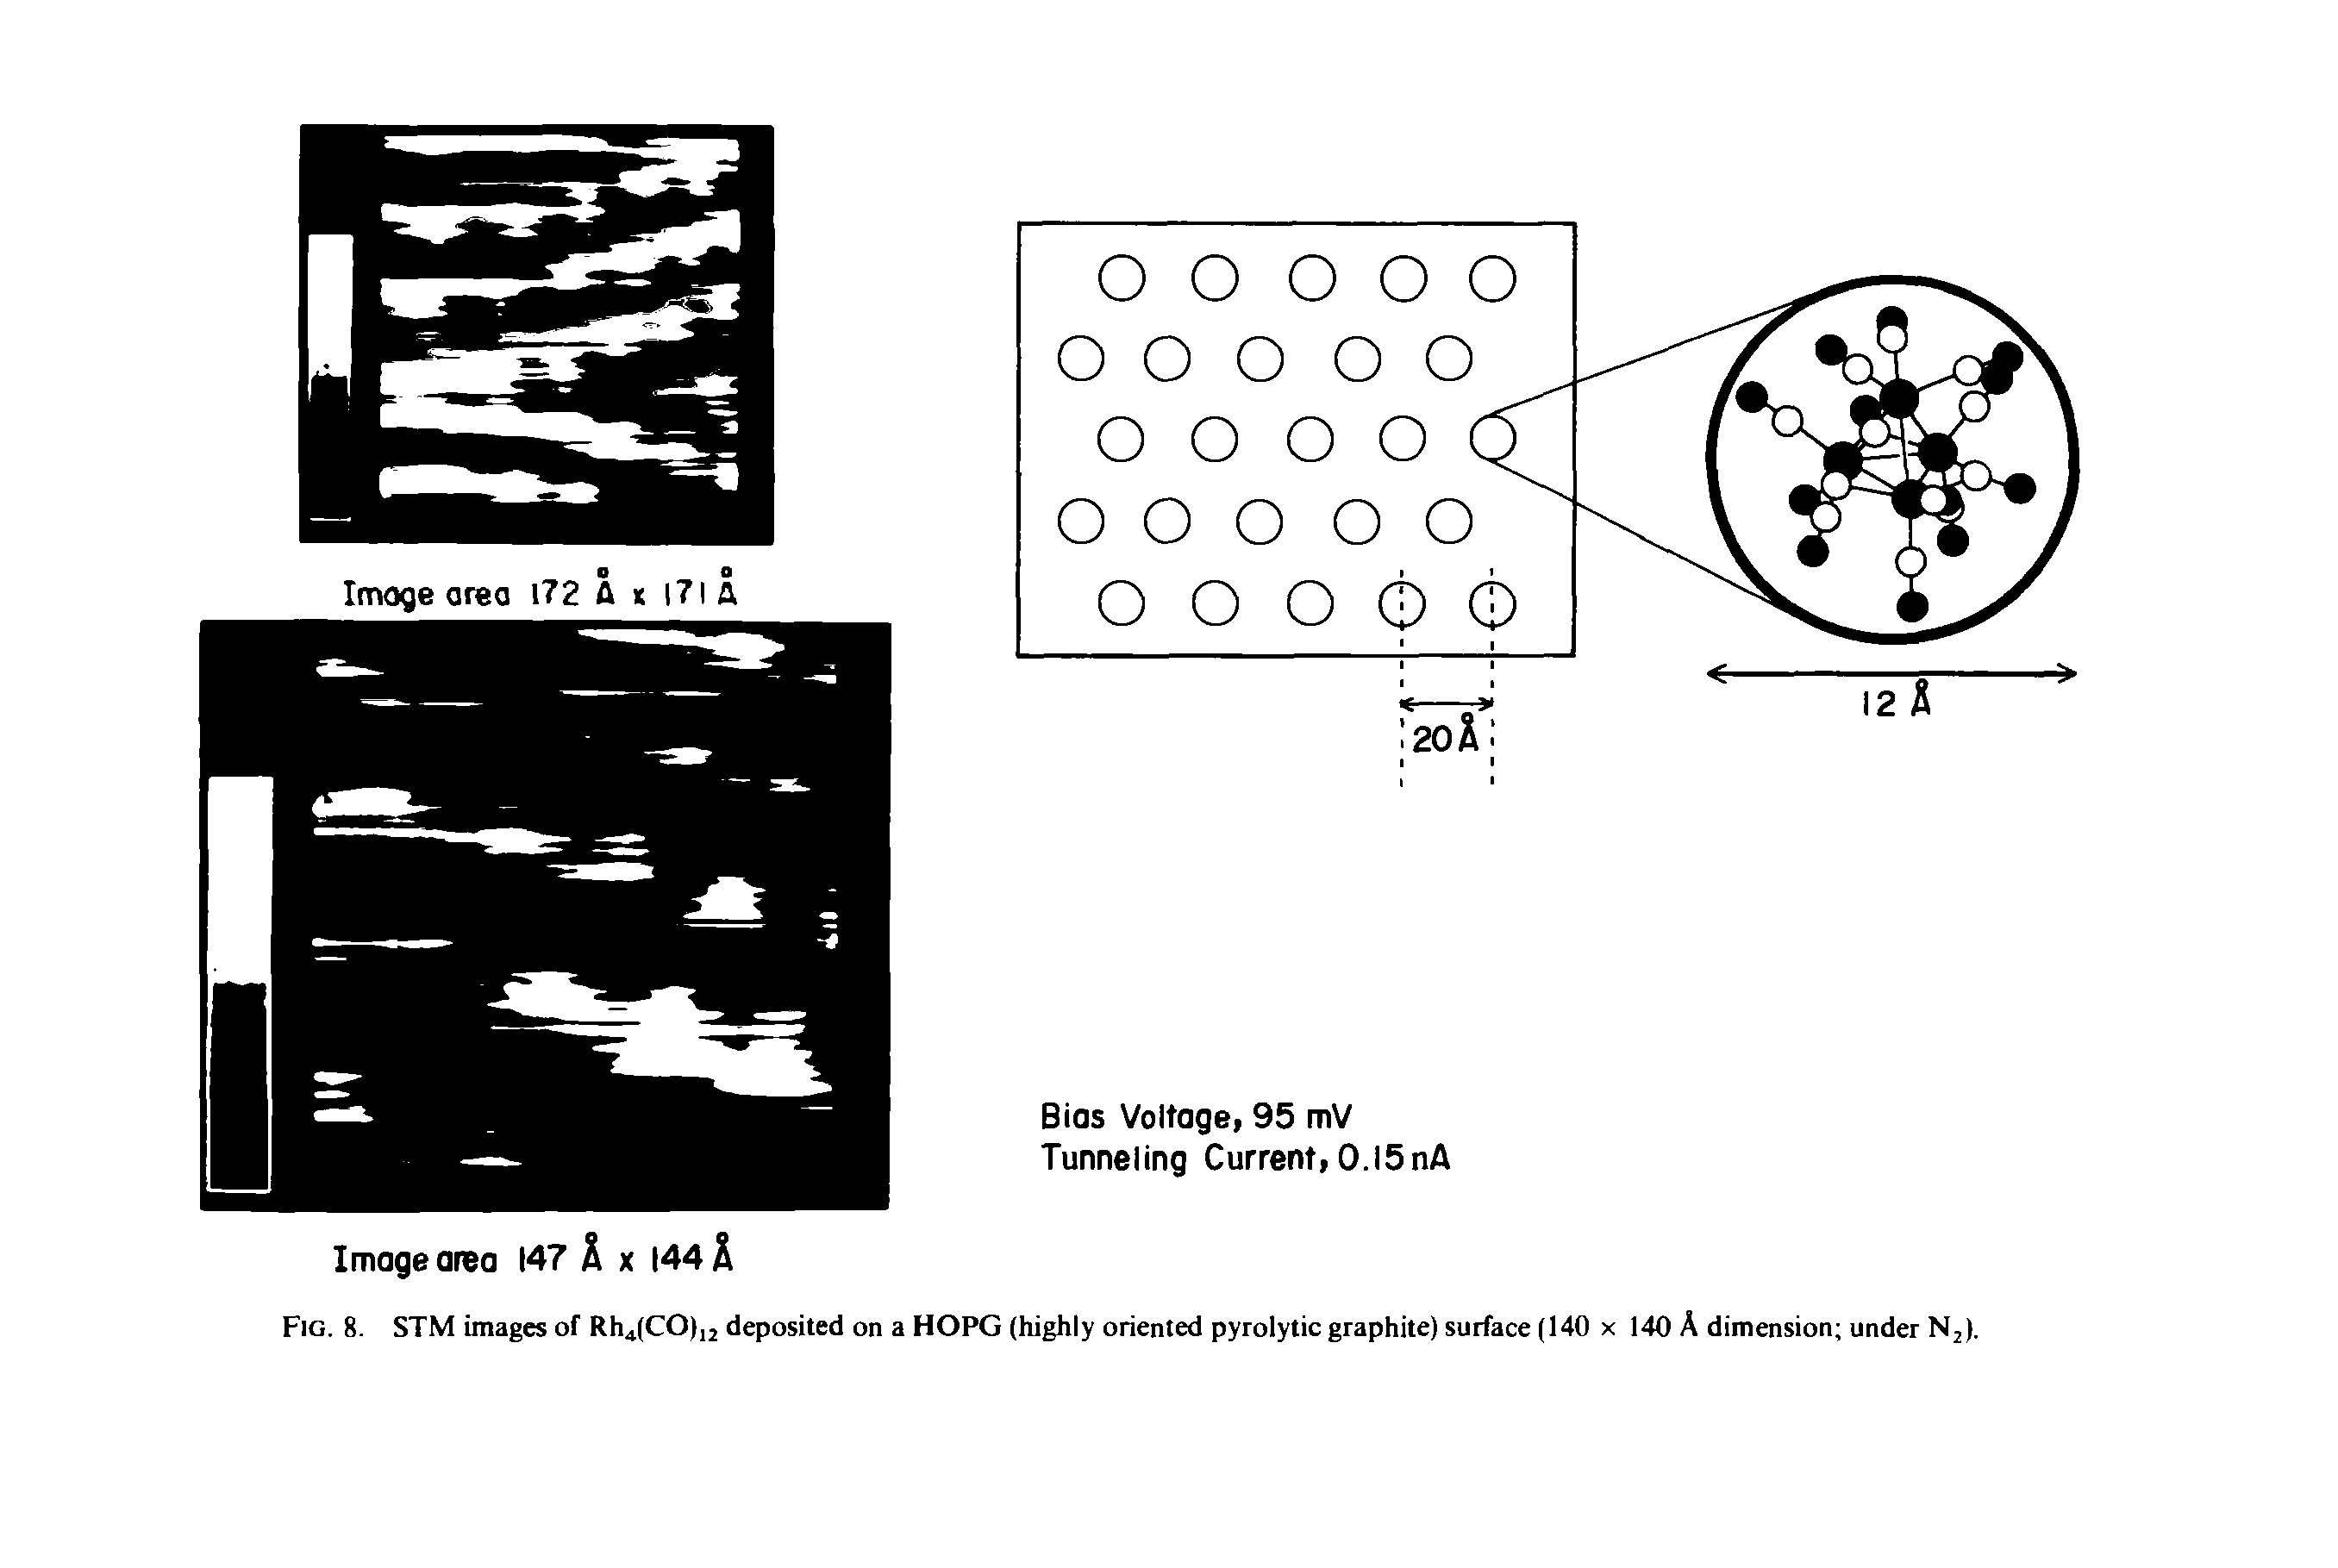 Fig. 8. STM images of RhJCO), deposited on a HOPG (highly oriented pyrolytic graphite) surface (140 x 140 A dimension under Nj).